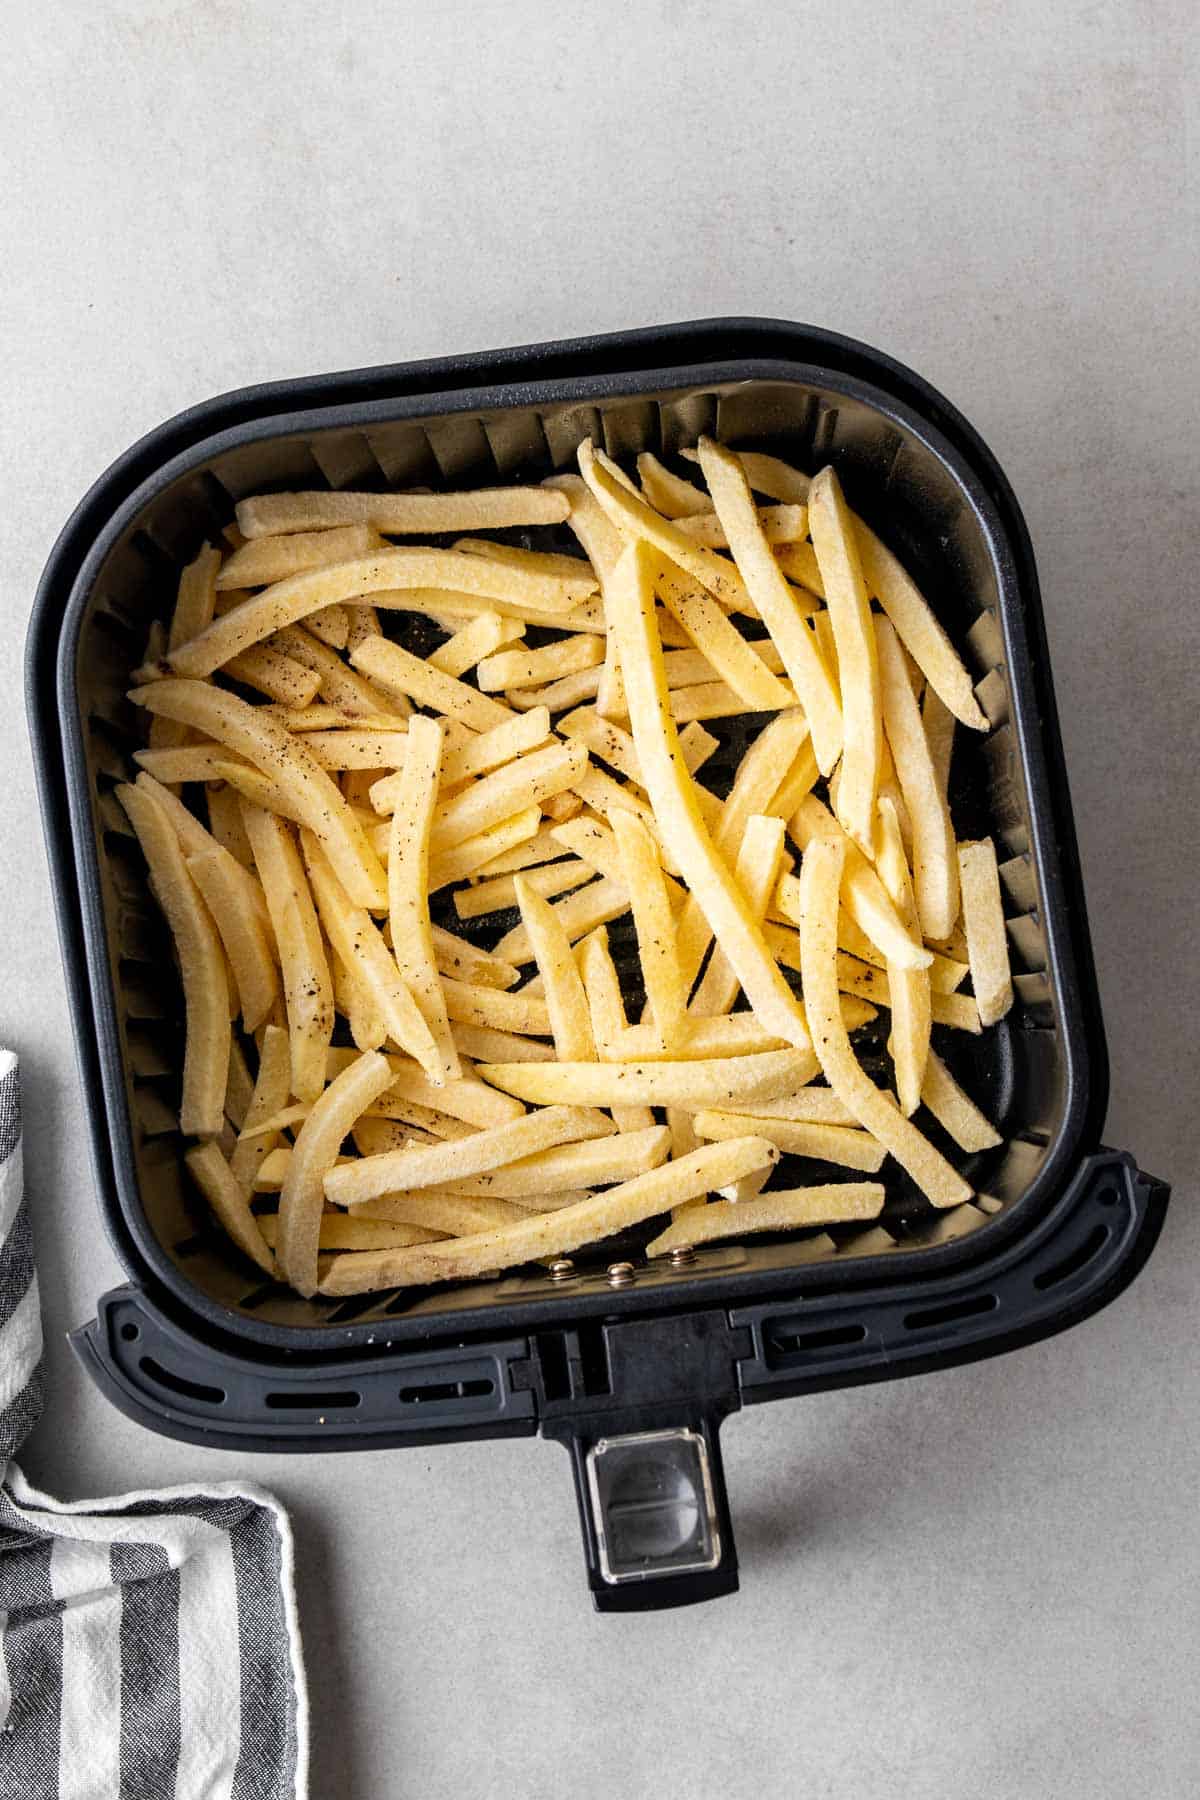 frozen French fries in the air fryer ready to be cooked